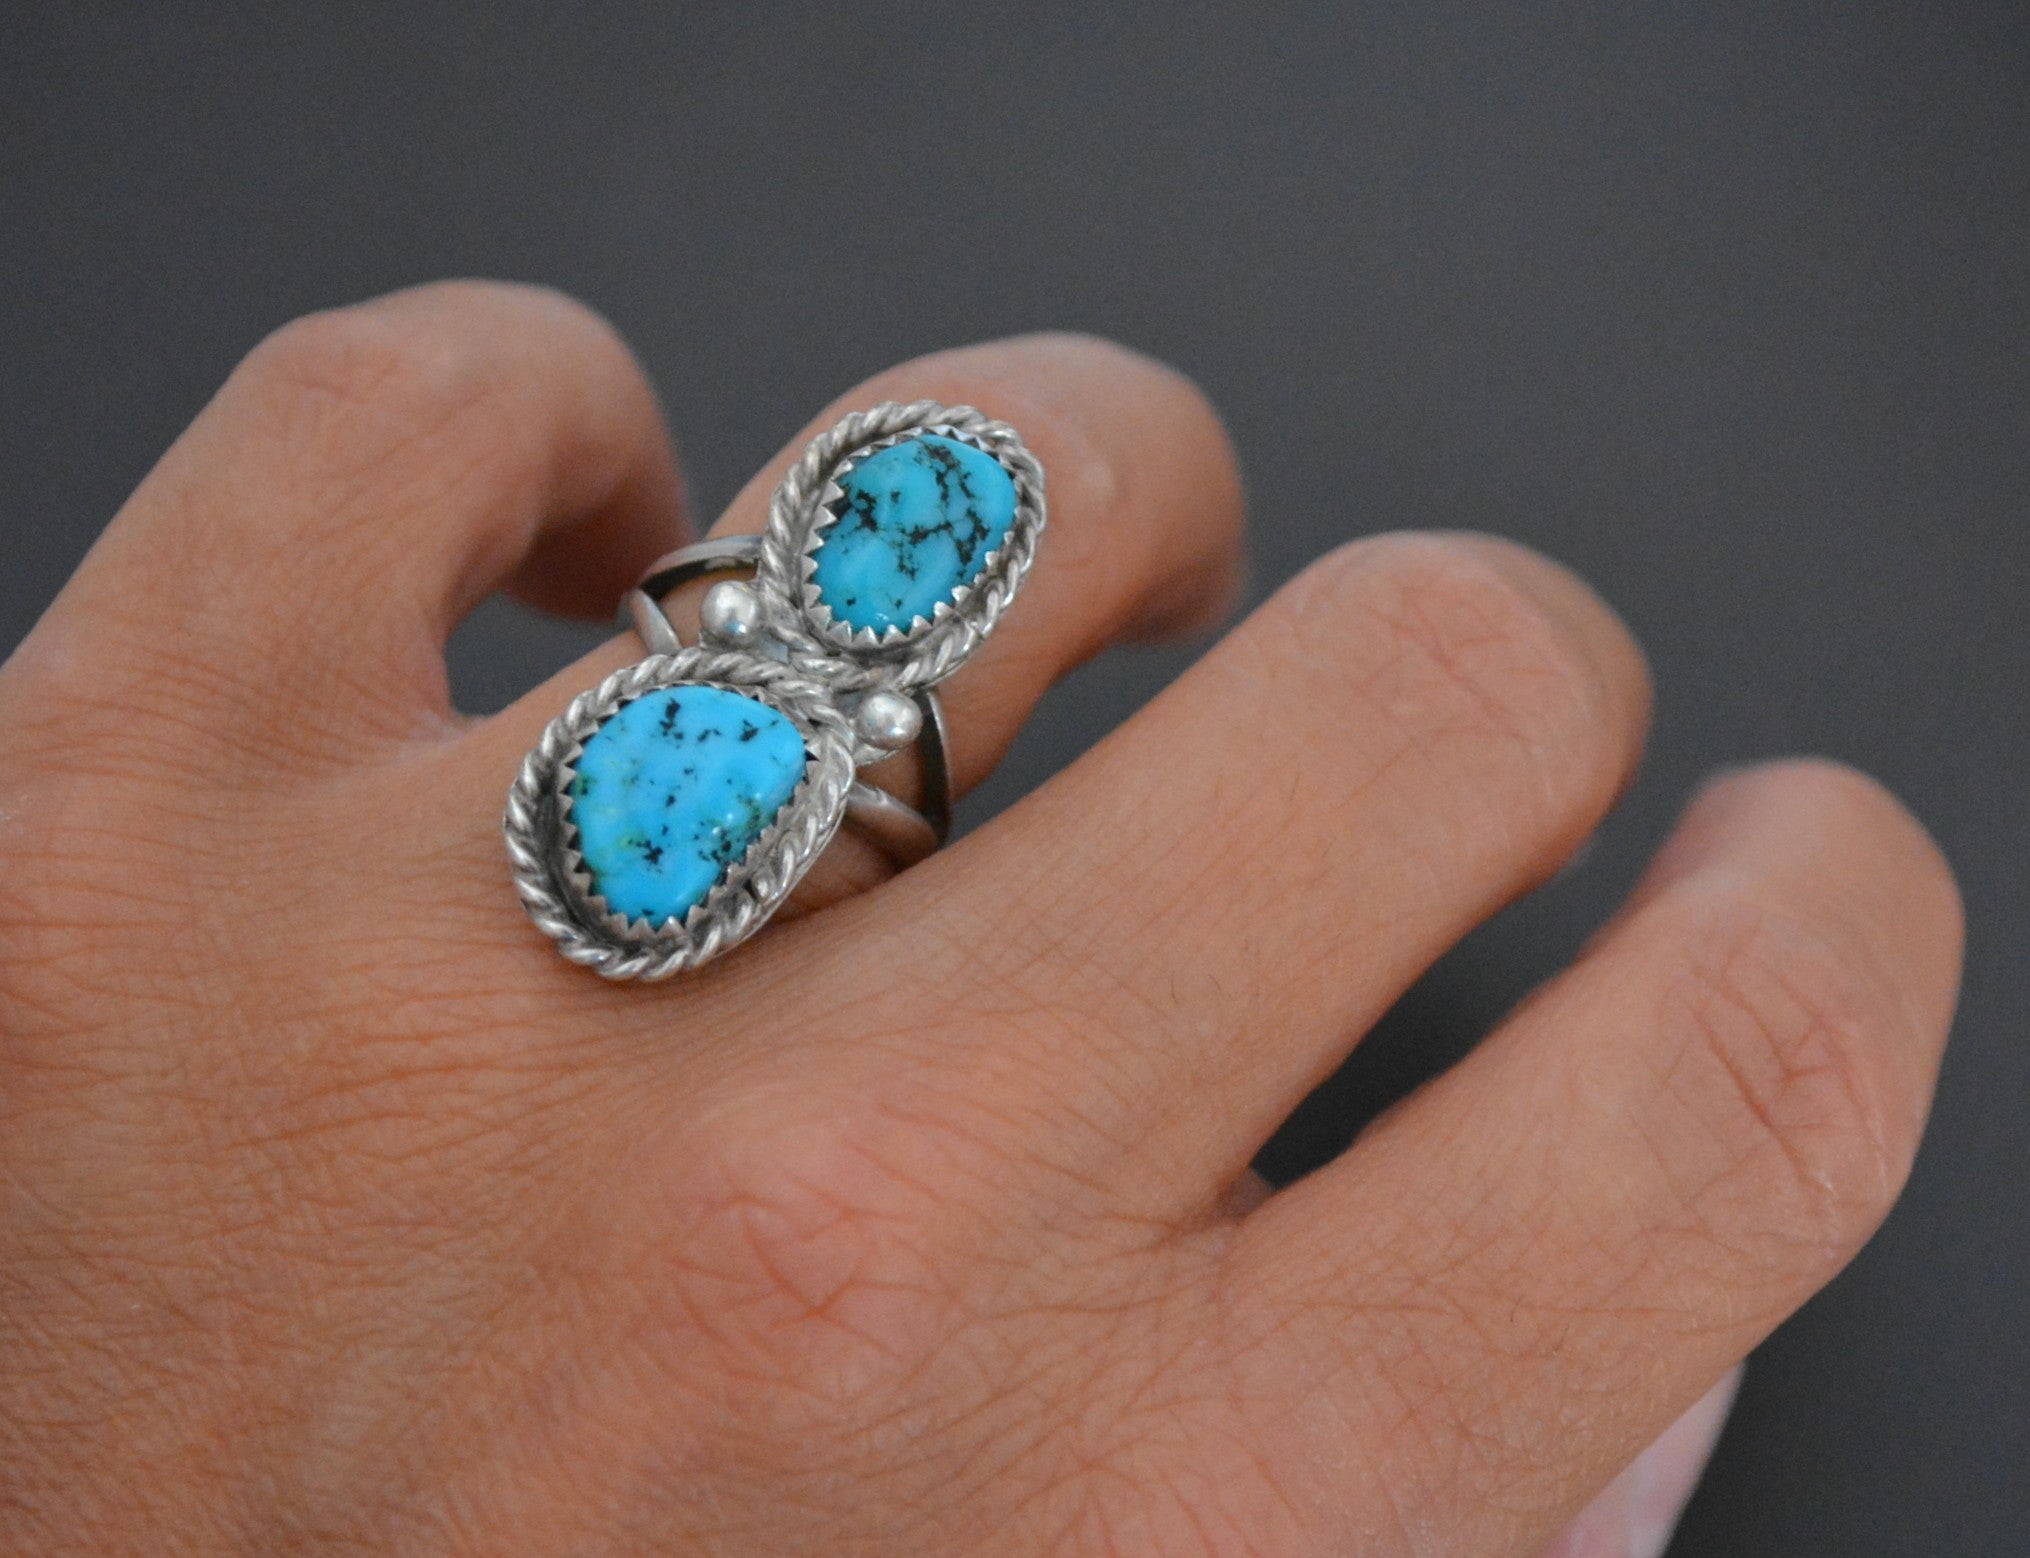 Native American Navajo Turquoise Nugget Ring - Size 5